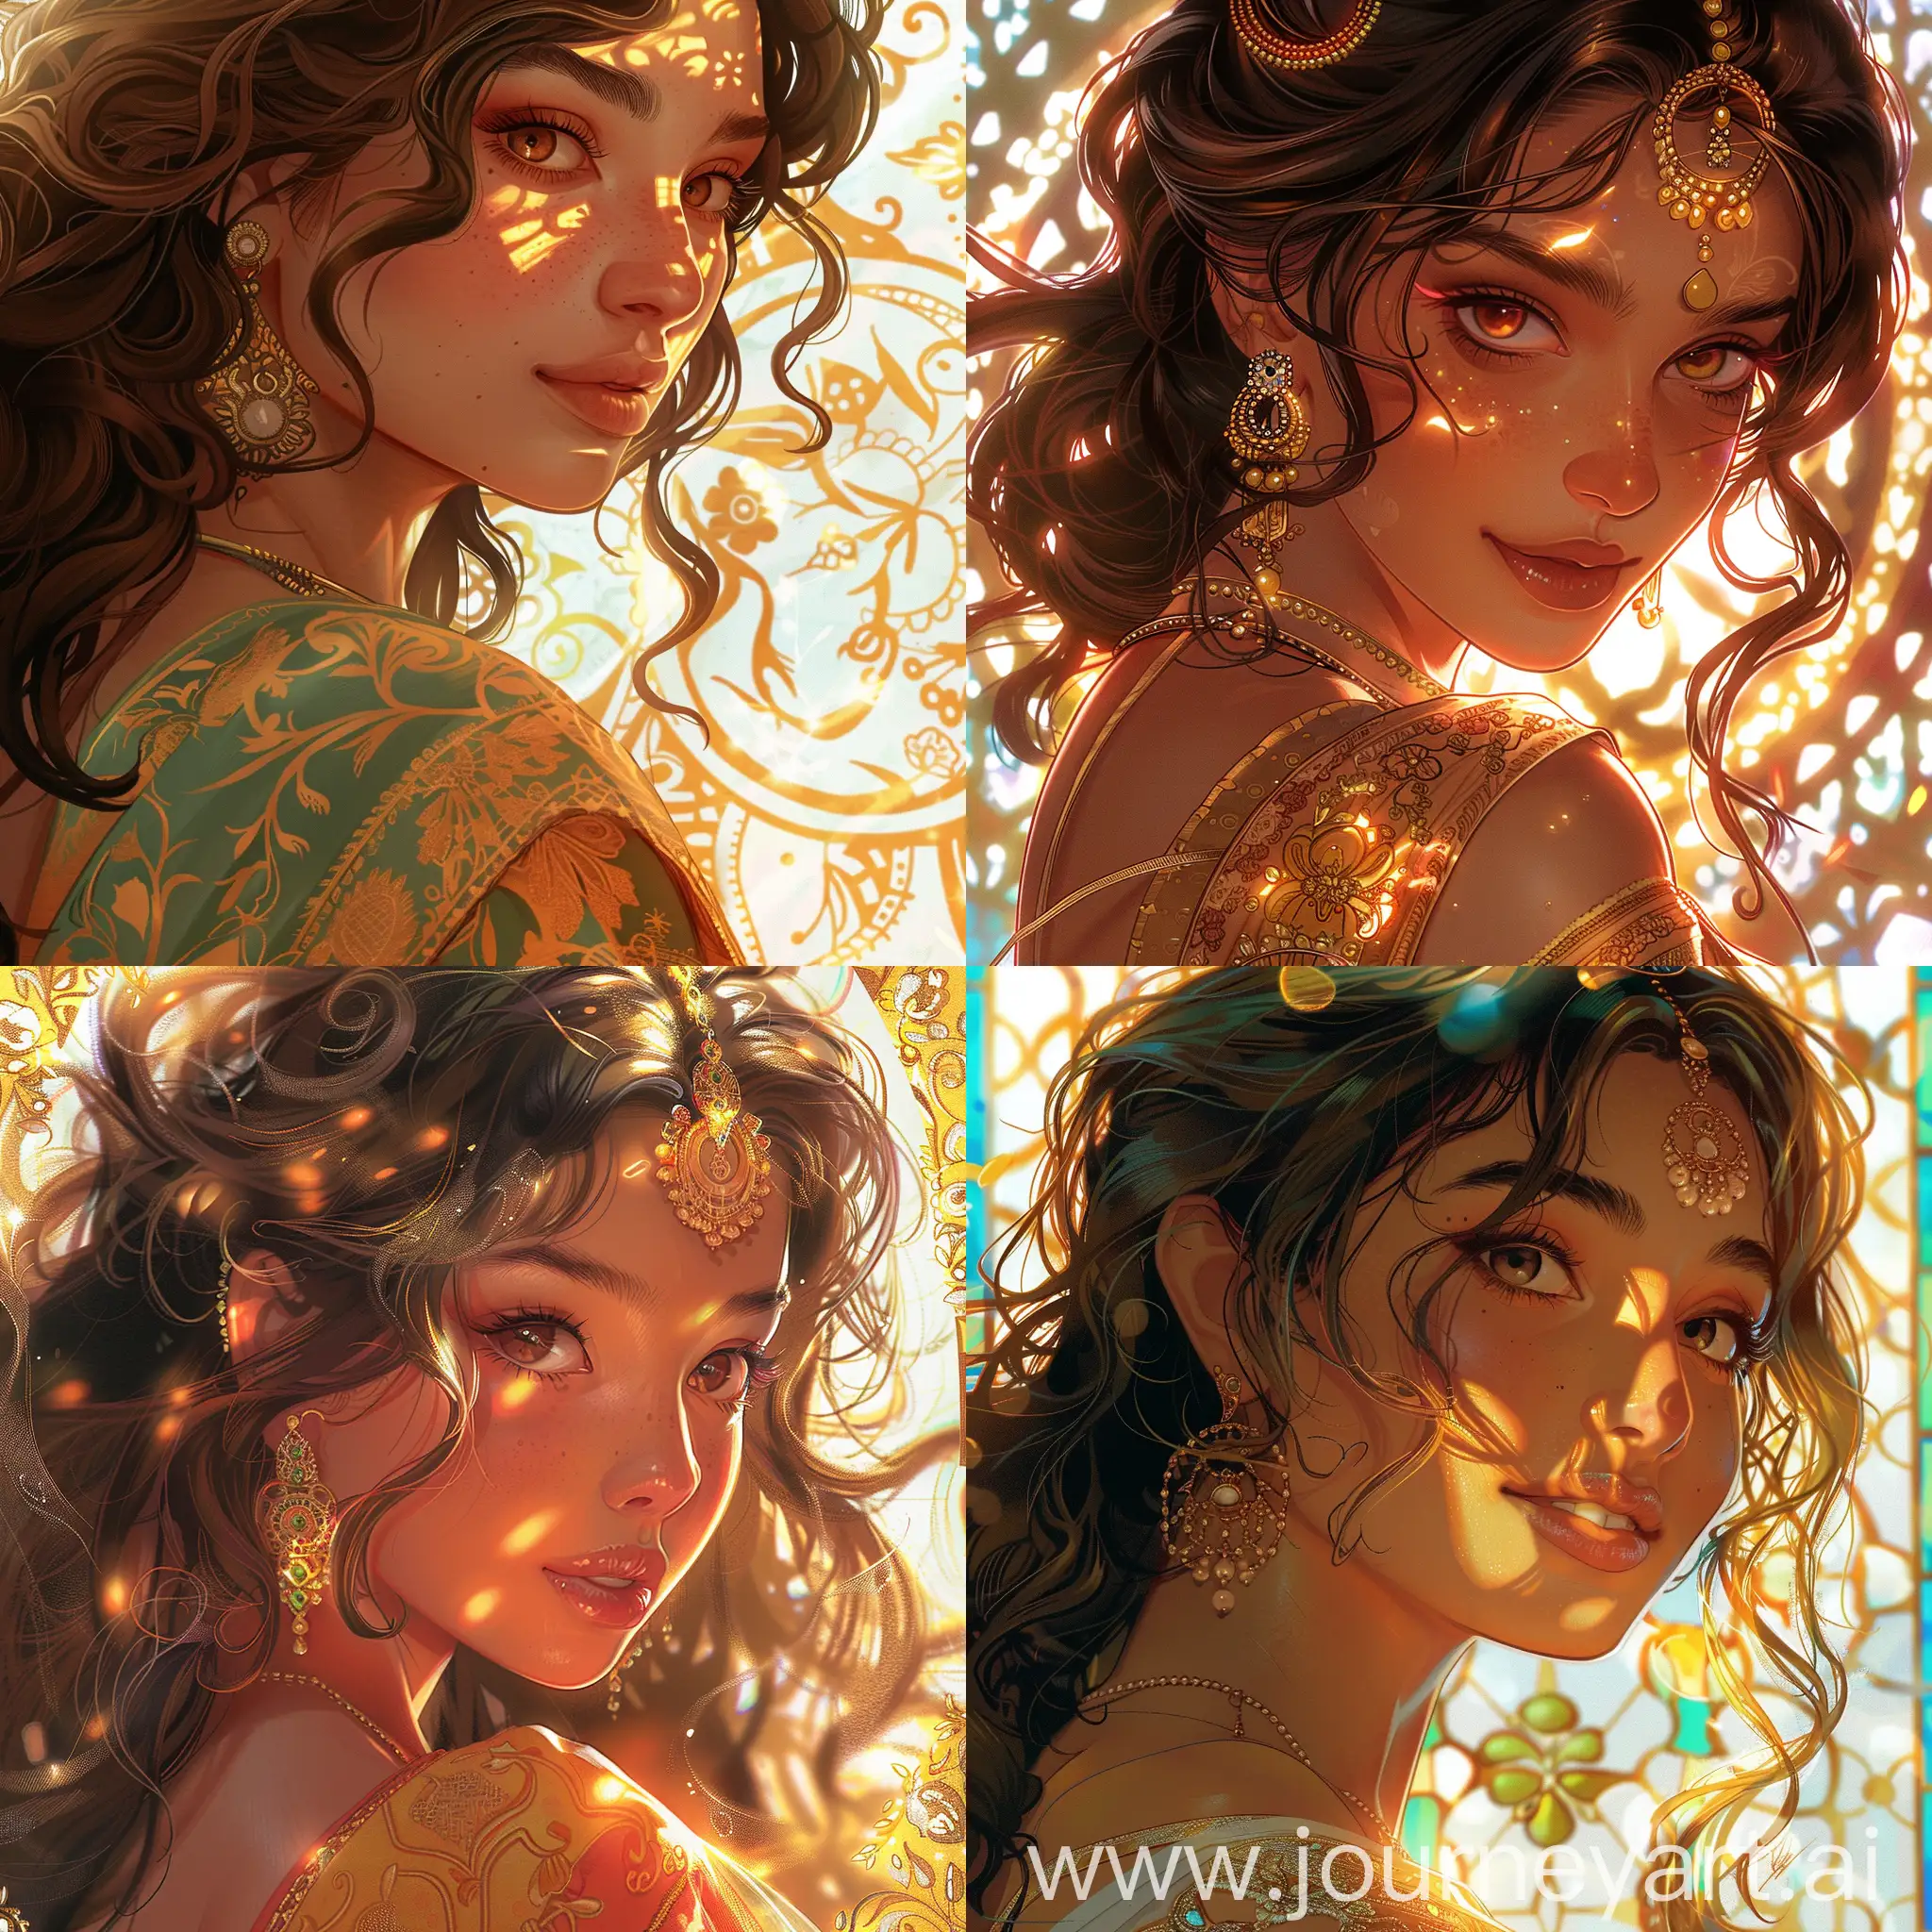 a close up of a woman with a INDIAN dress, in the style of Alphonse Mucha, stunning character art, beautiful female teacher,magic, golden glass, pixiv illustration,anime, curly brown hair with single pony tail,india style, children’s book illustration, whimsical and simple illustration aesthetic, bright colors, in the style of Clémence Guillemaud